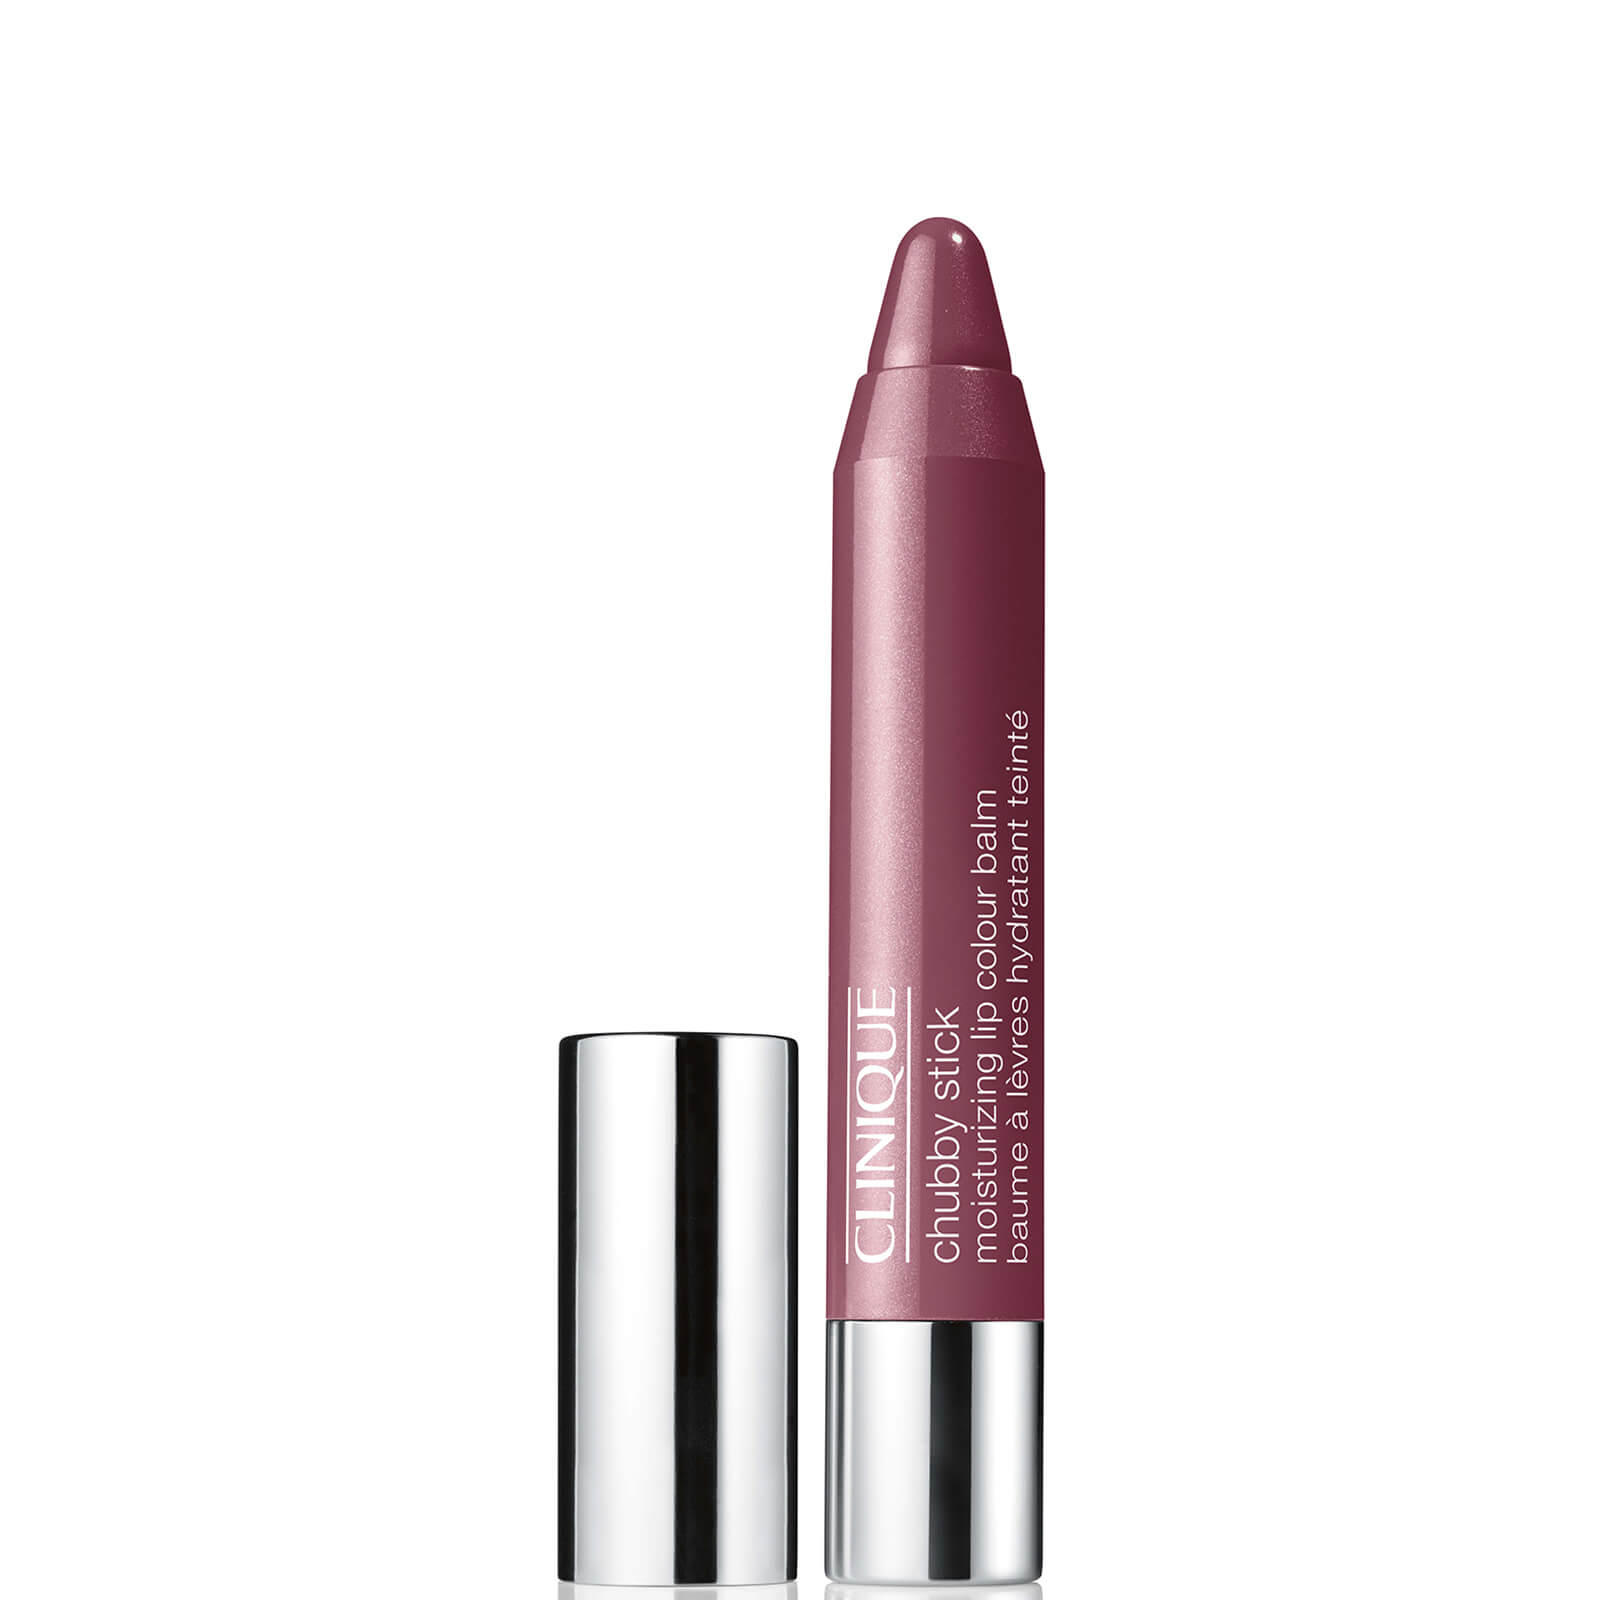 Clinique Chubby Stick 3g (Various Shades) - Broadest Berry